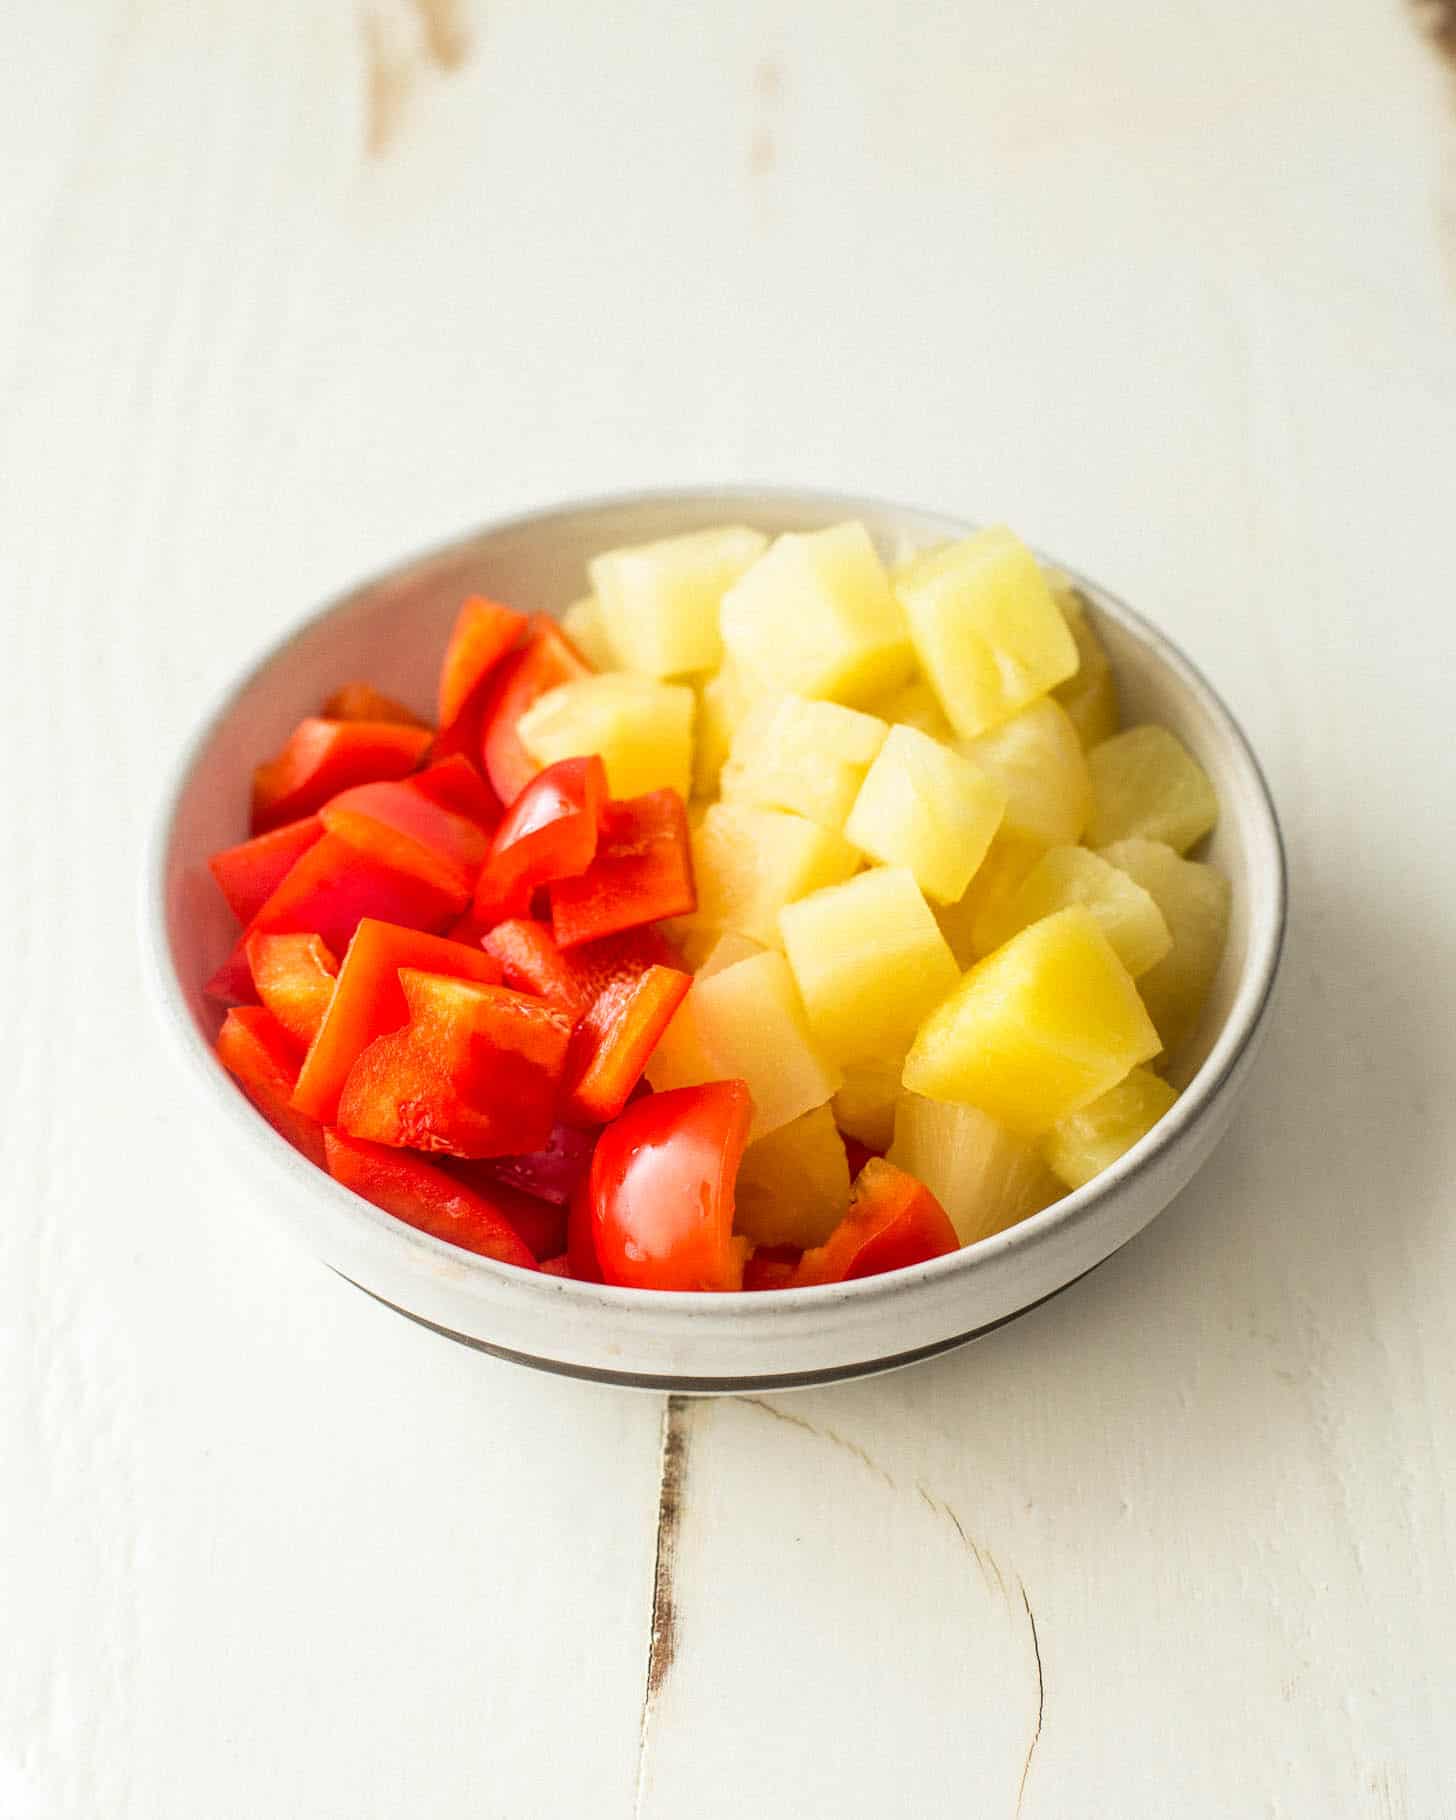 pineapple chunks and red bell pepper pieces in a small white bowl